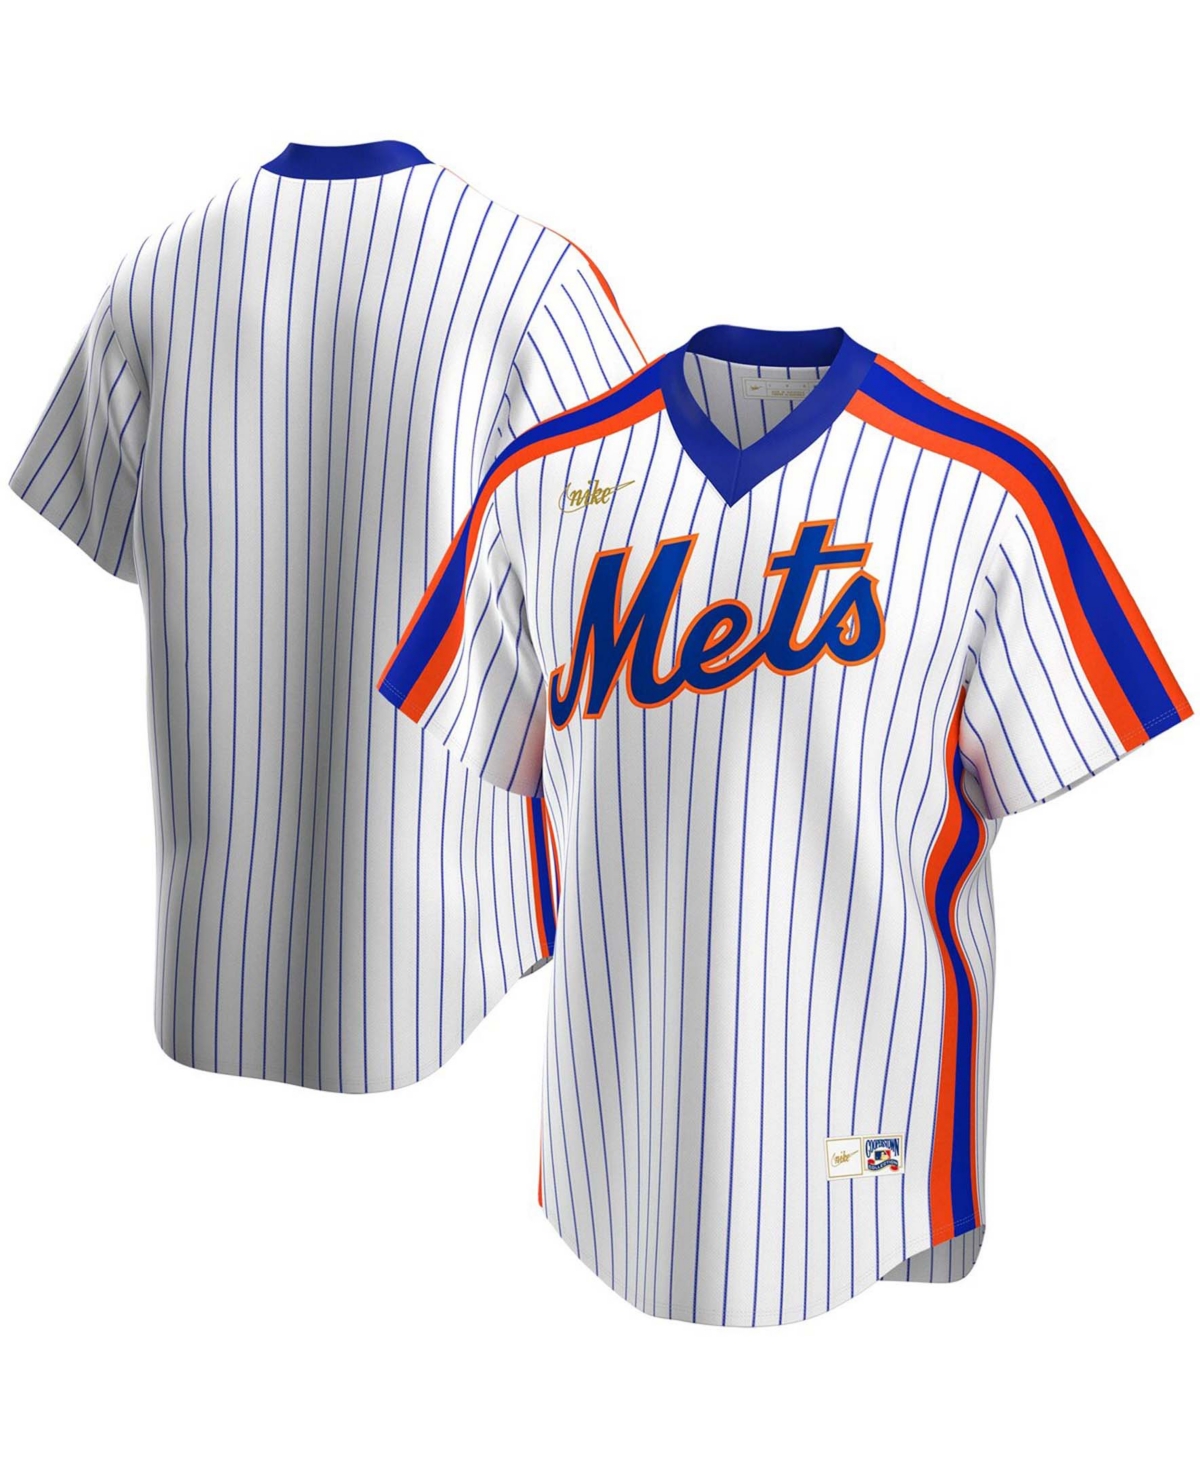 Nike Francisco Lindor White New York Mets Home Authentic Player Jersey